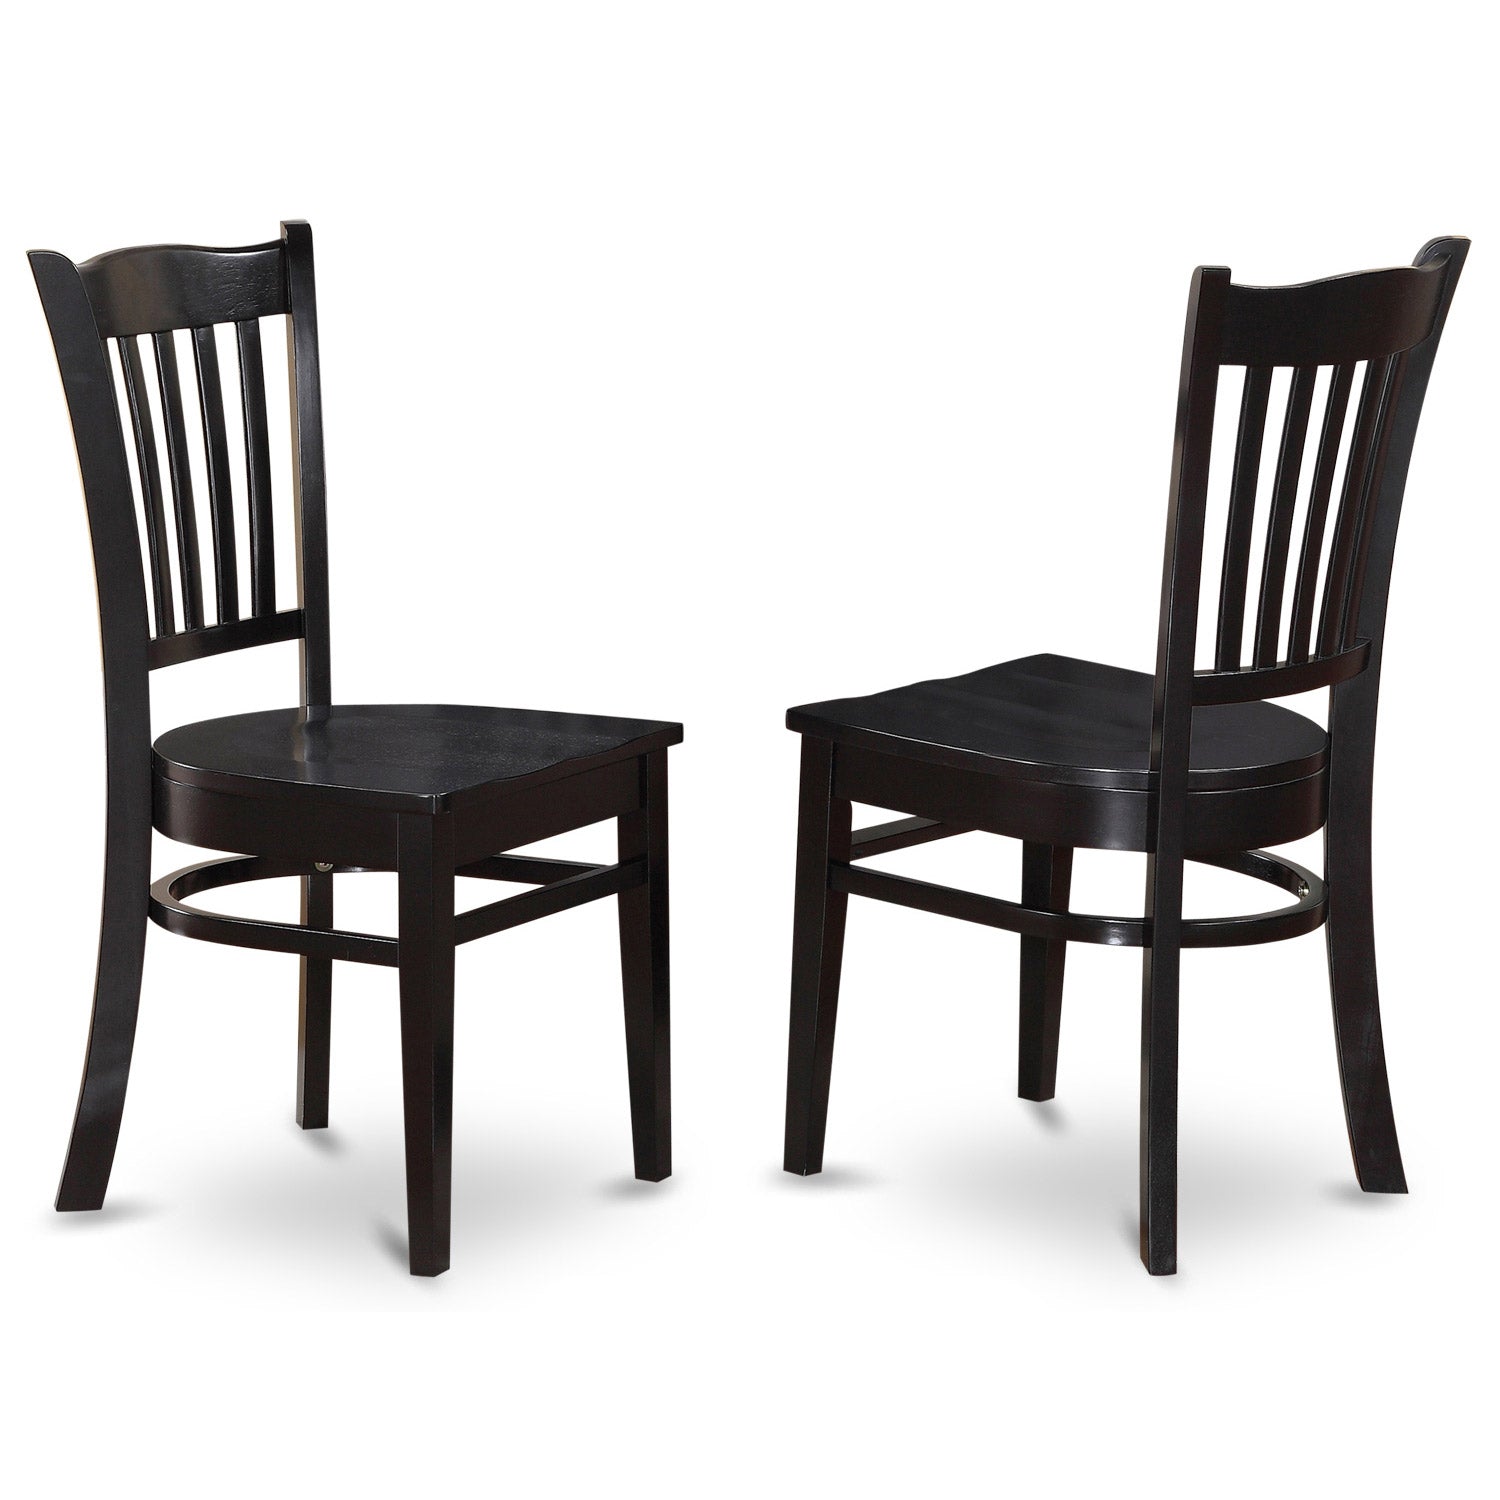 LGGR7-BLK-W 7 Pc Dining set with a Dining Table and 6 Wood Kitchen Chairs in Black